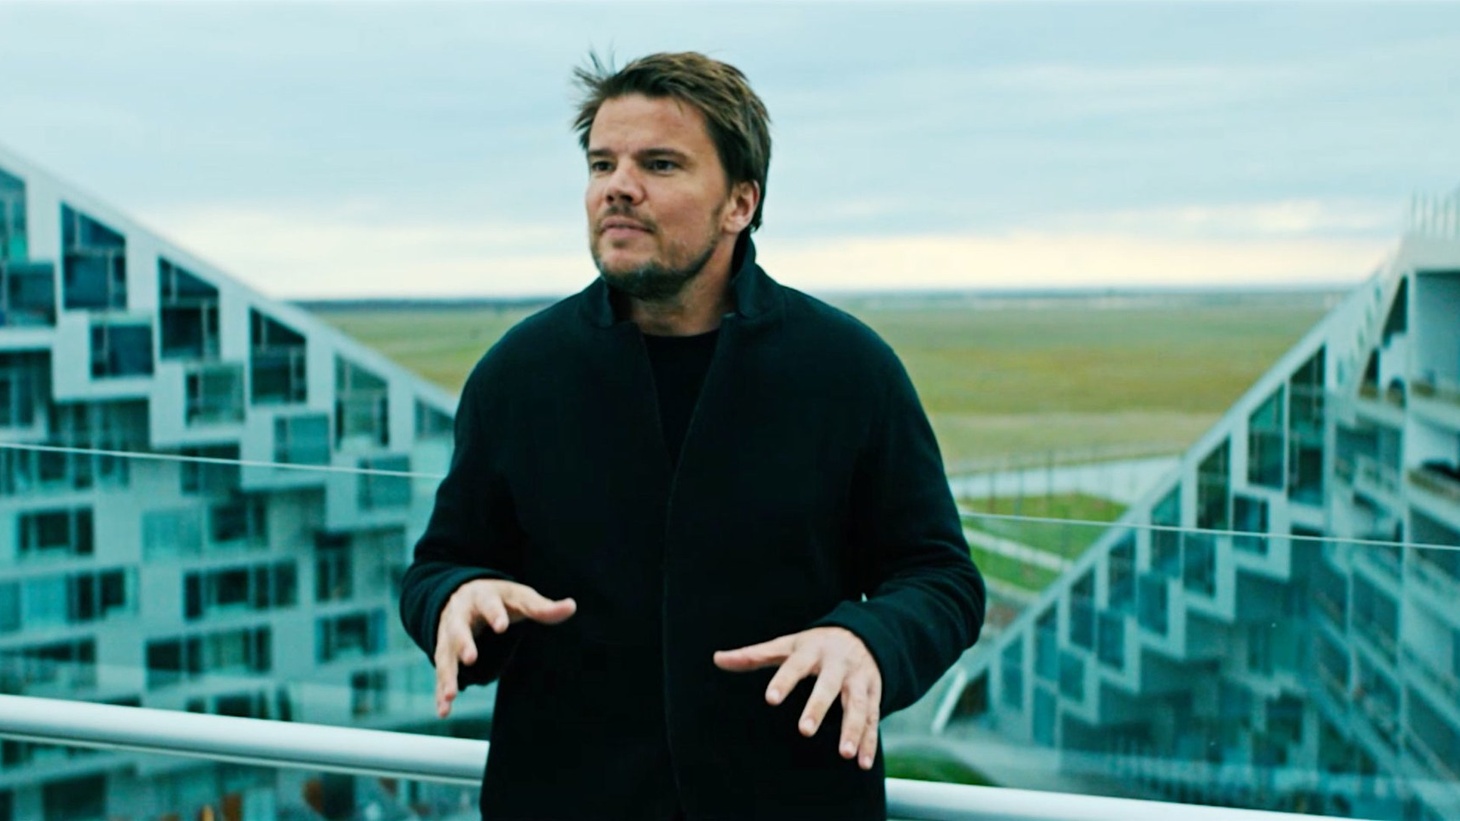 Abstract The Art of Design S01 – Ep04 Bjarke Ingels: Architecture